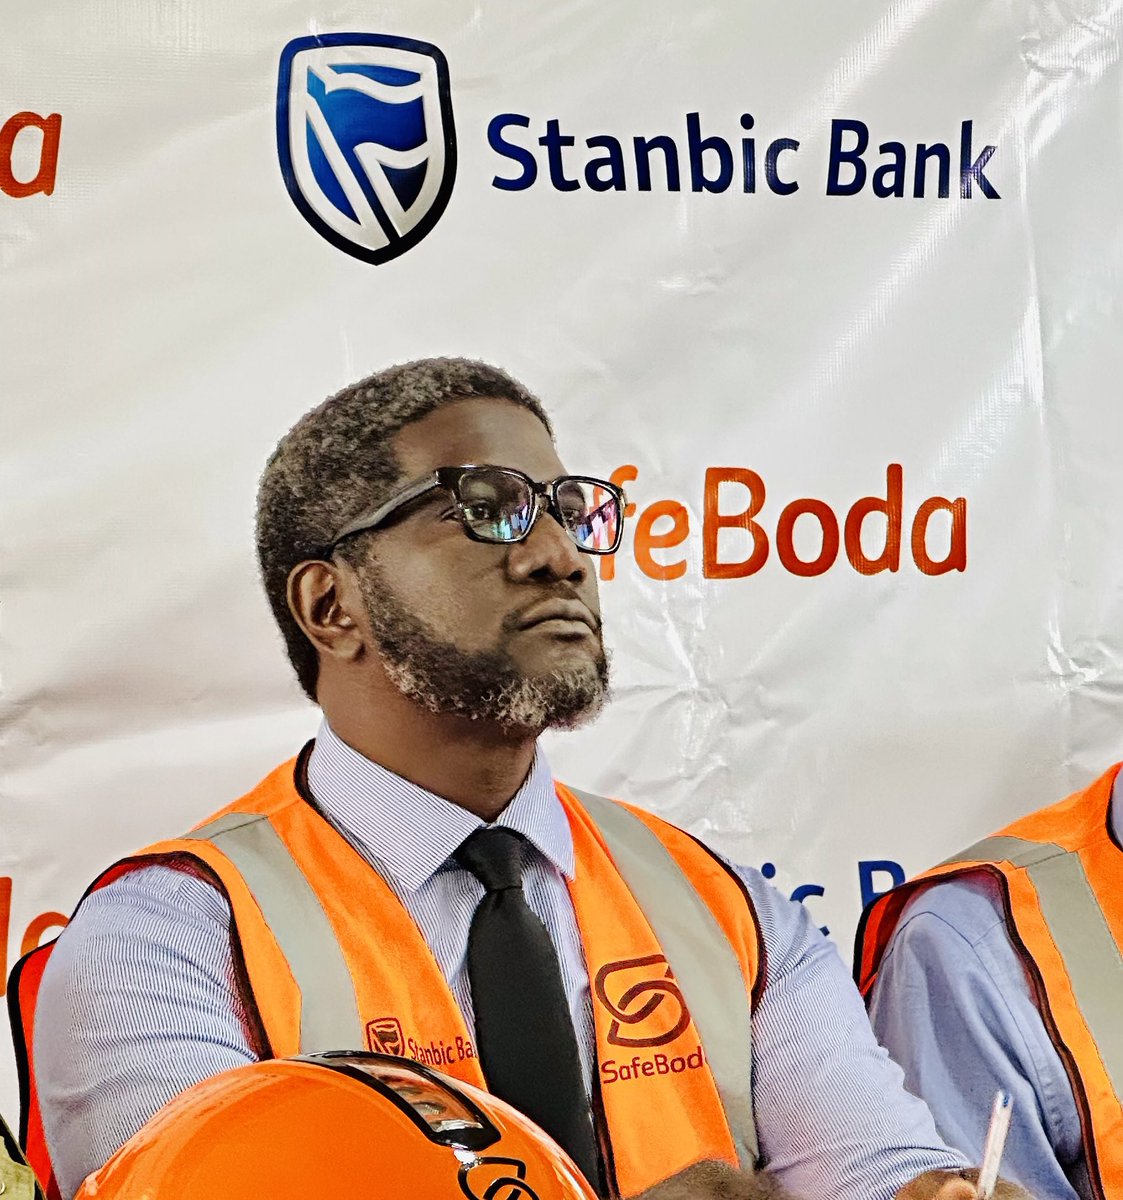 Safe Boda riders will also be paid a daily compensation of UGX 50,000 for up to 15 days if they are unable to go to work as they undergo treatment of injuries arising from an accident.

#SecureWithStanbic #SafeInsuredRides #LibertyInsurance